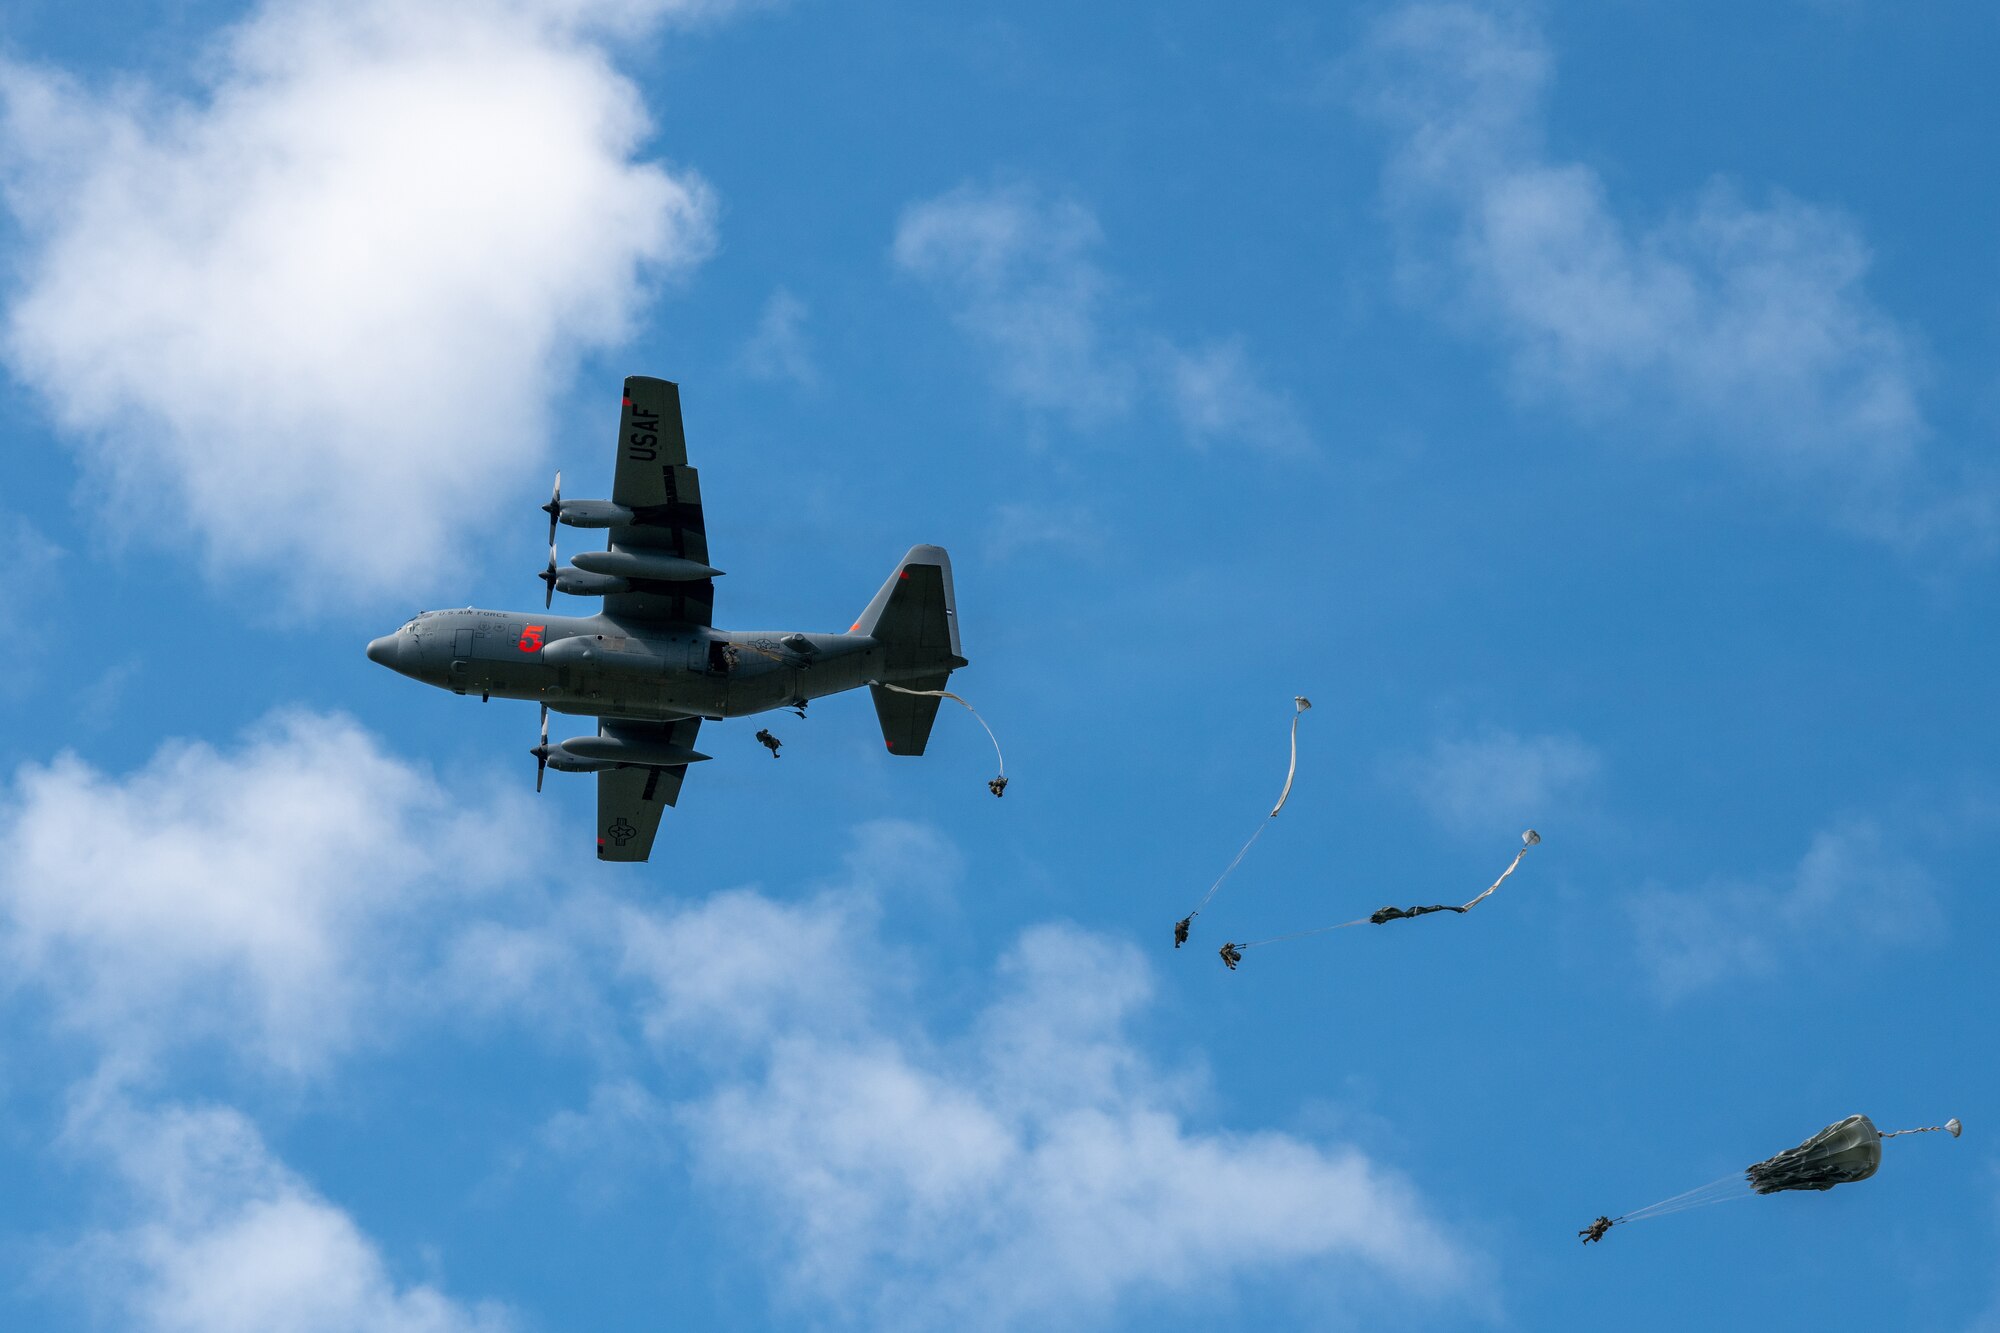 Plane flies through sky, Army soldiers deploy out using parachutes.